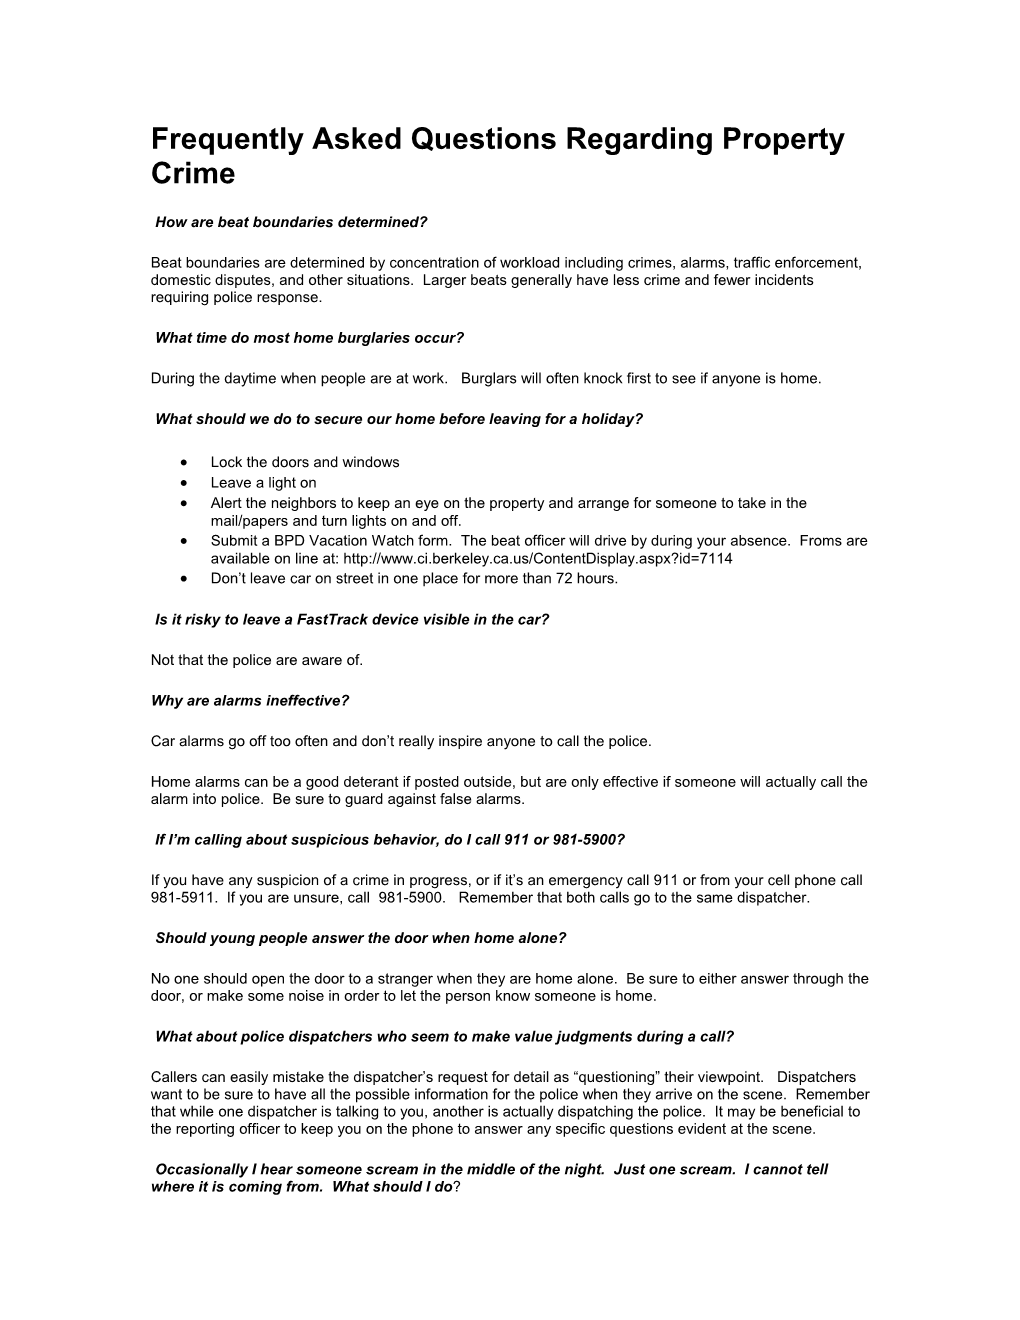 Frequently Asked Questions Regarding Property Crime